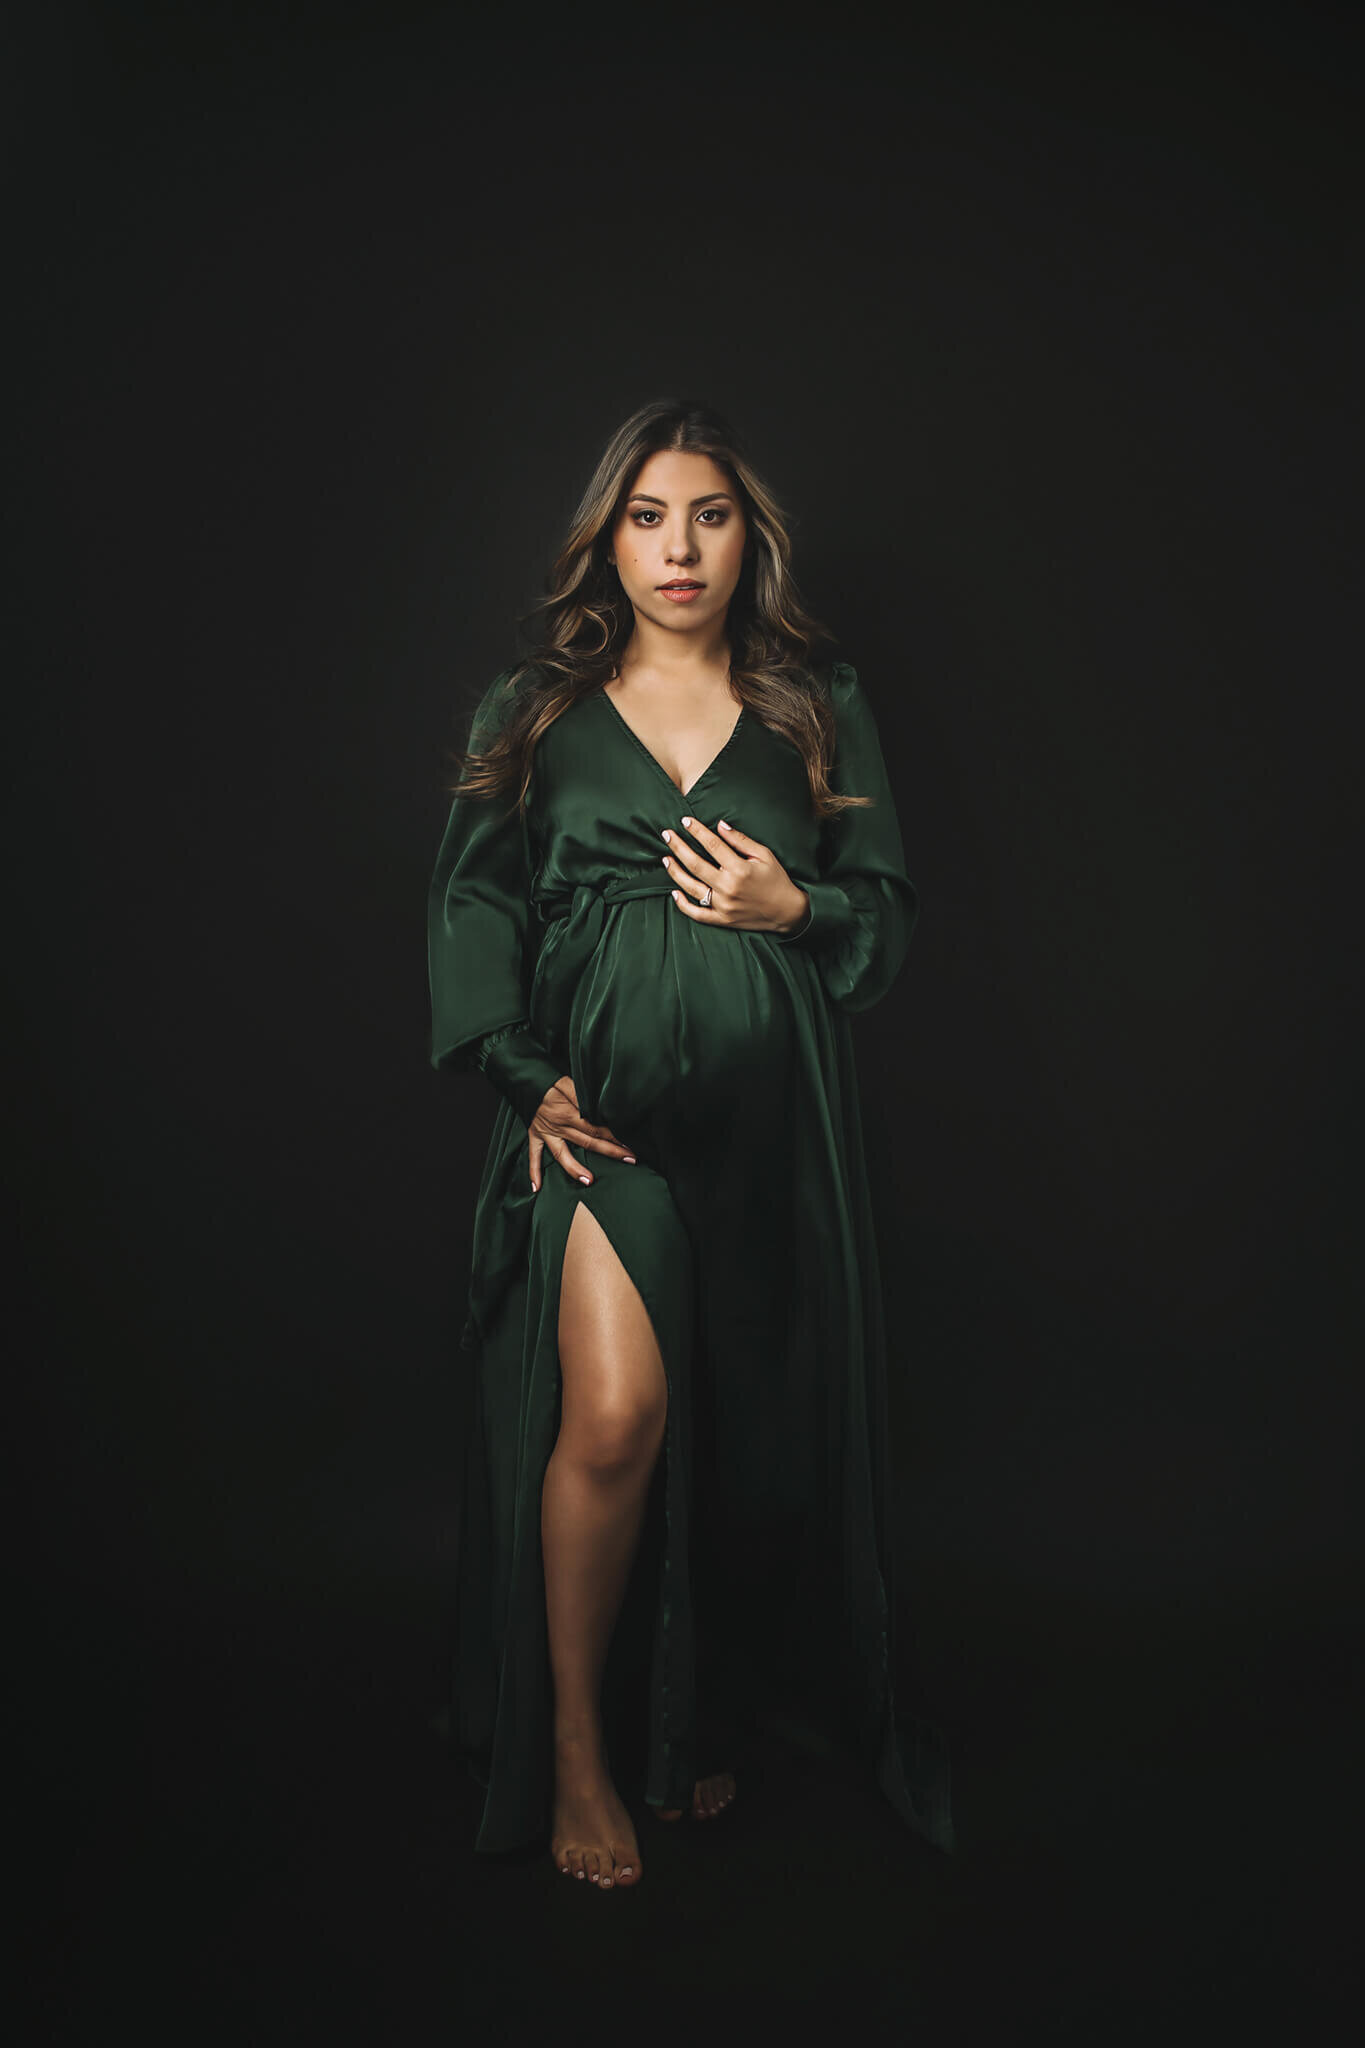 Powerful picture of a pregnante woman wearing a green dress in a black background